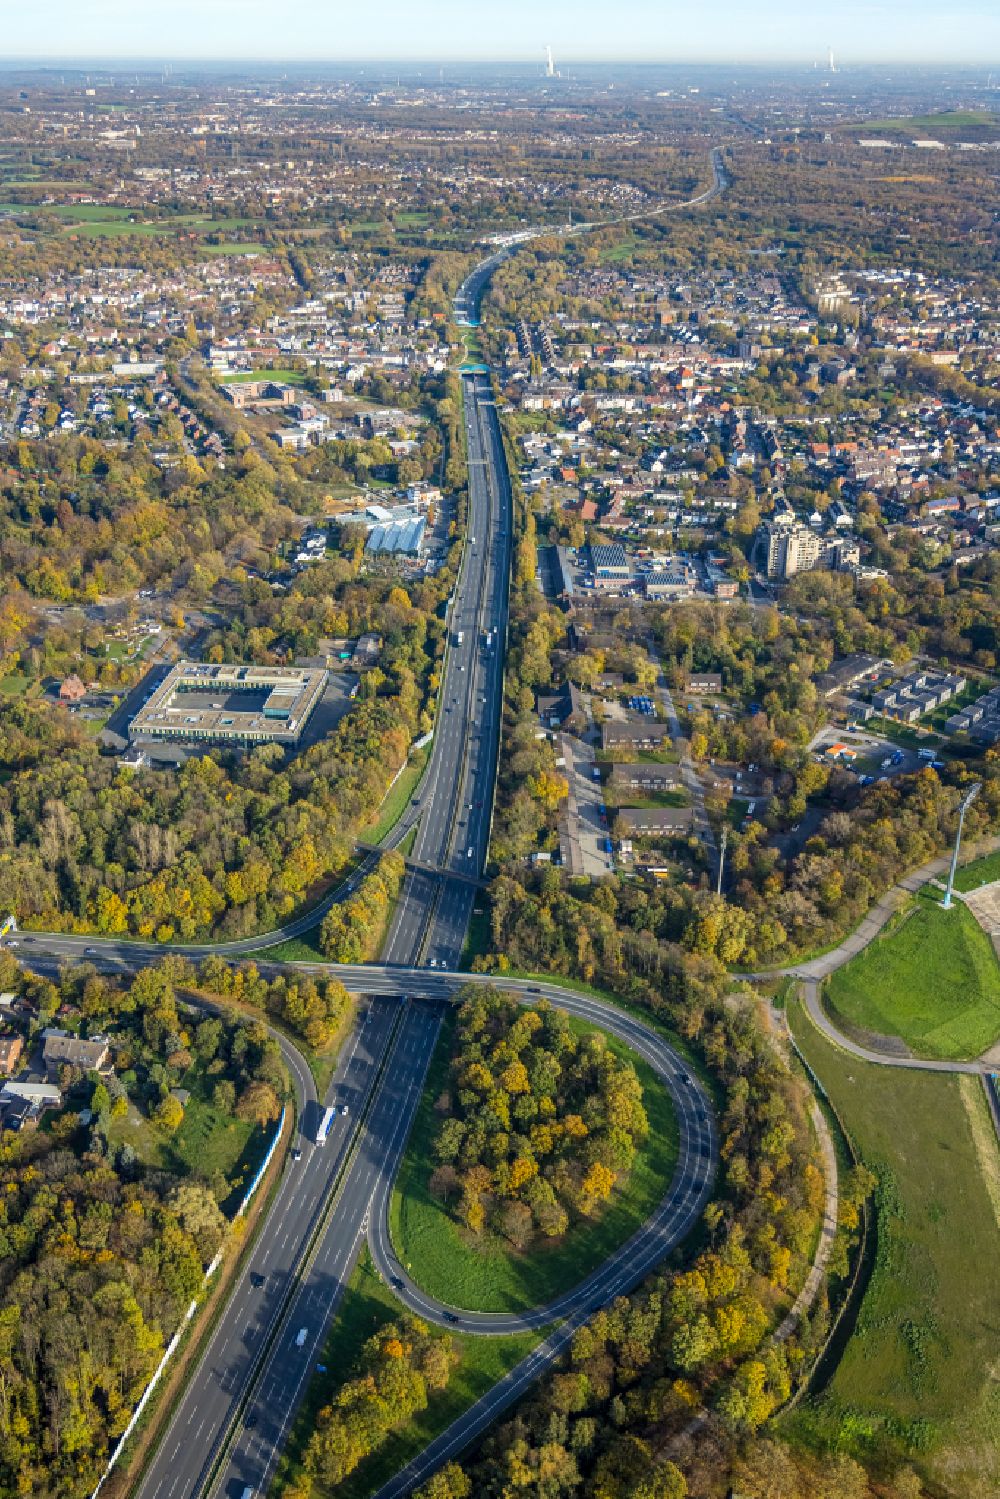 Aerial image Gelsenkirchen - Routing and lanes in the course of the motorway exit and access to the BAB A2 and Veltins Arena in Gelsenkirchen in the Ruhr area in the state of North Rhine-Westphalia, Germany